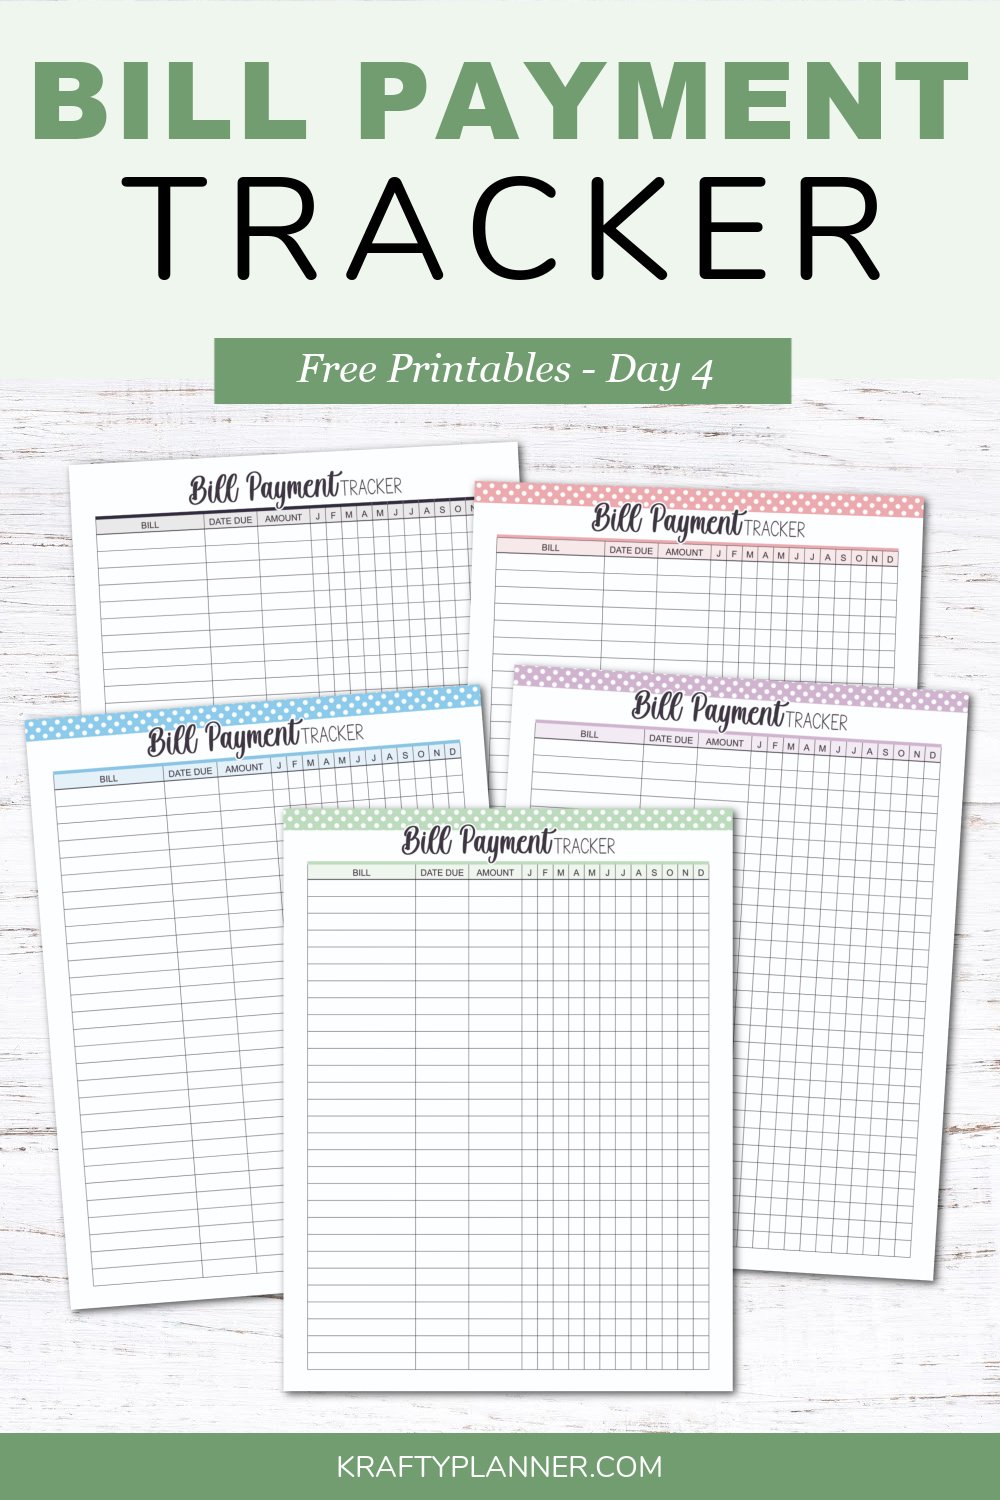 Bill Payment Tracker Free Printable (Day 4)